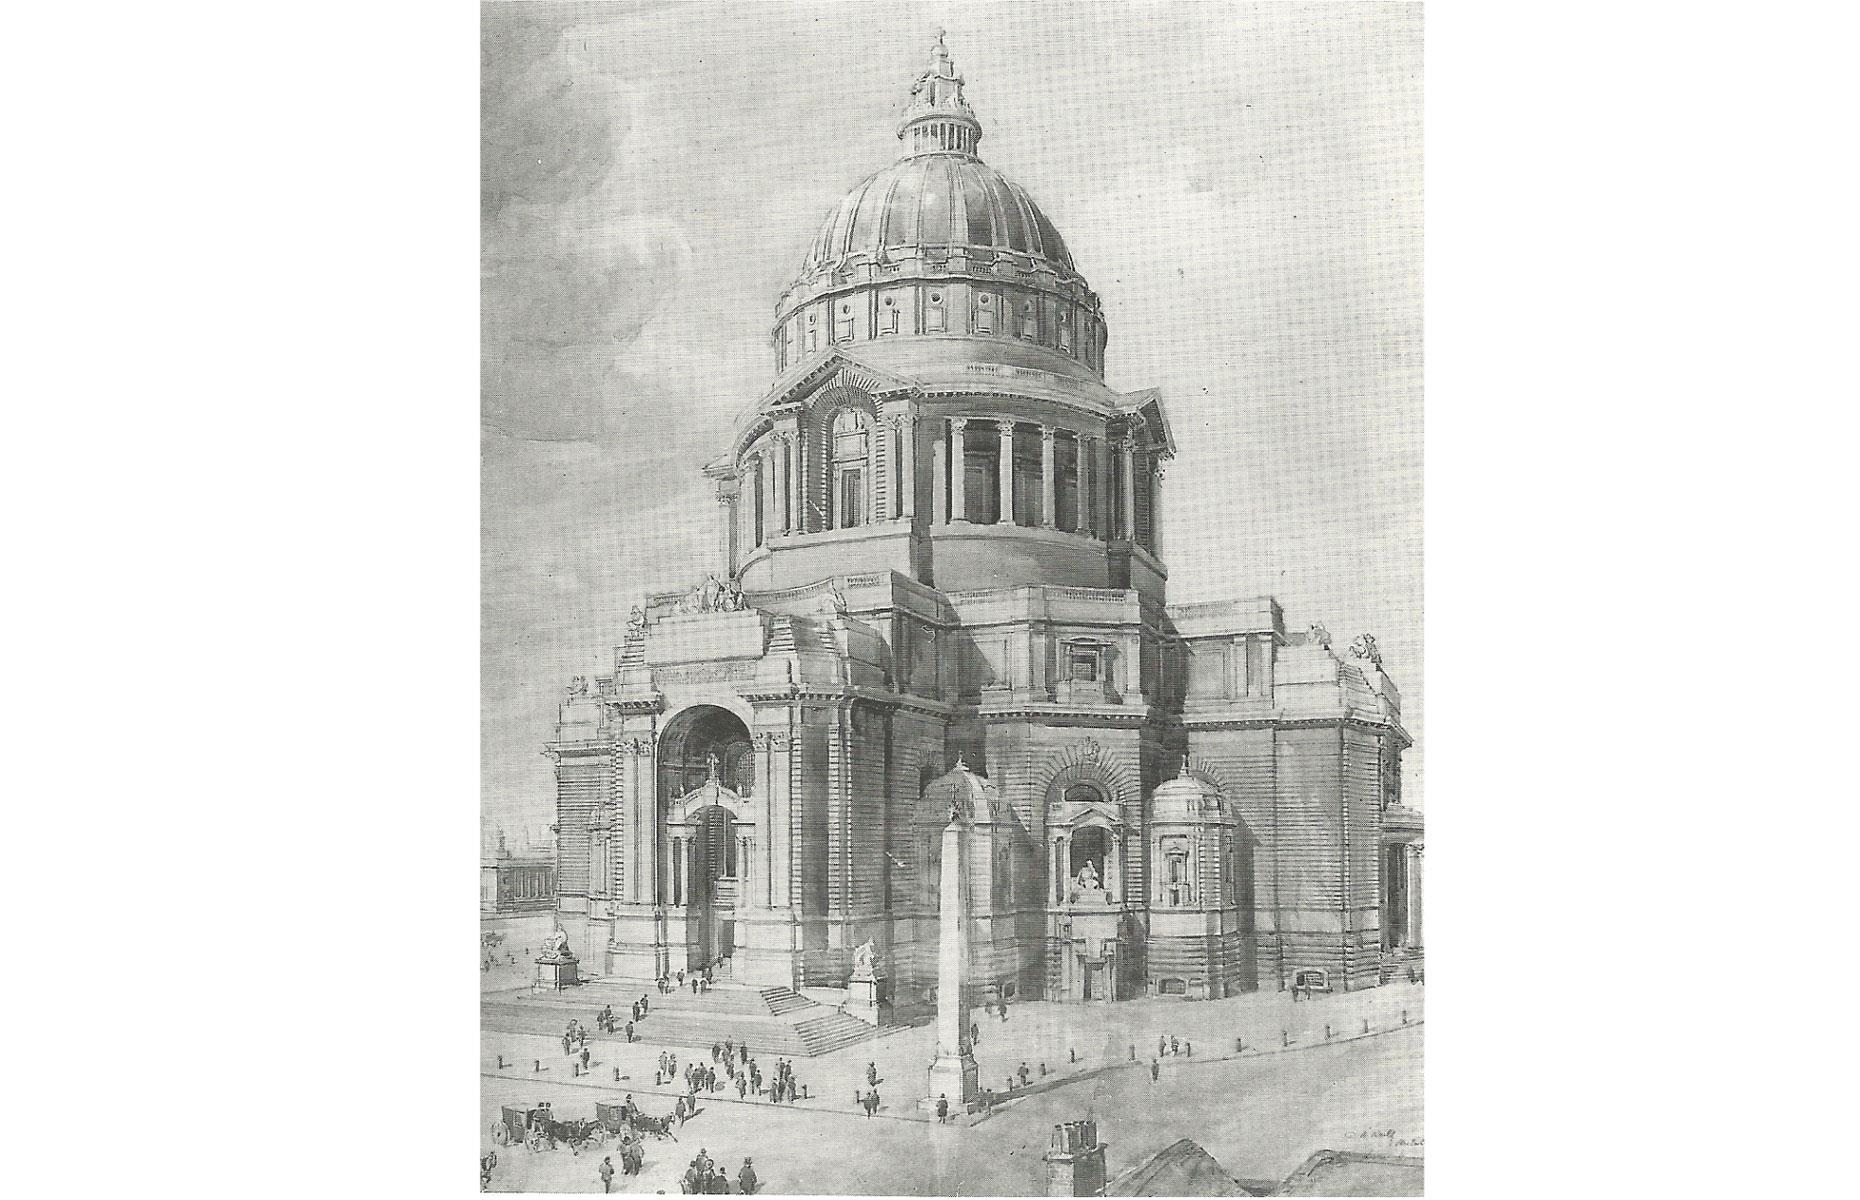 Scott won the open competition to design the cathedral in 1903. A number of outstanding entries were proposed, including this Neoclassical design by Charles Herbert Reilly, which nods to St Paul's Cathedral in London.